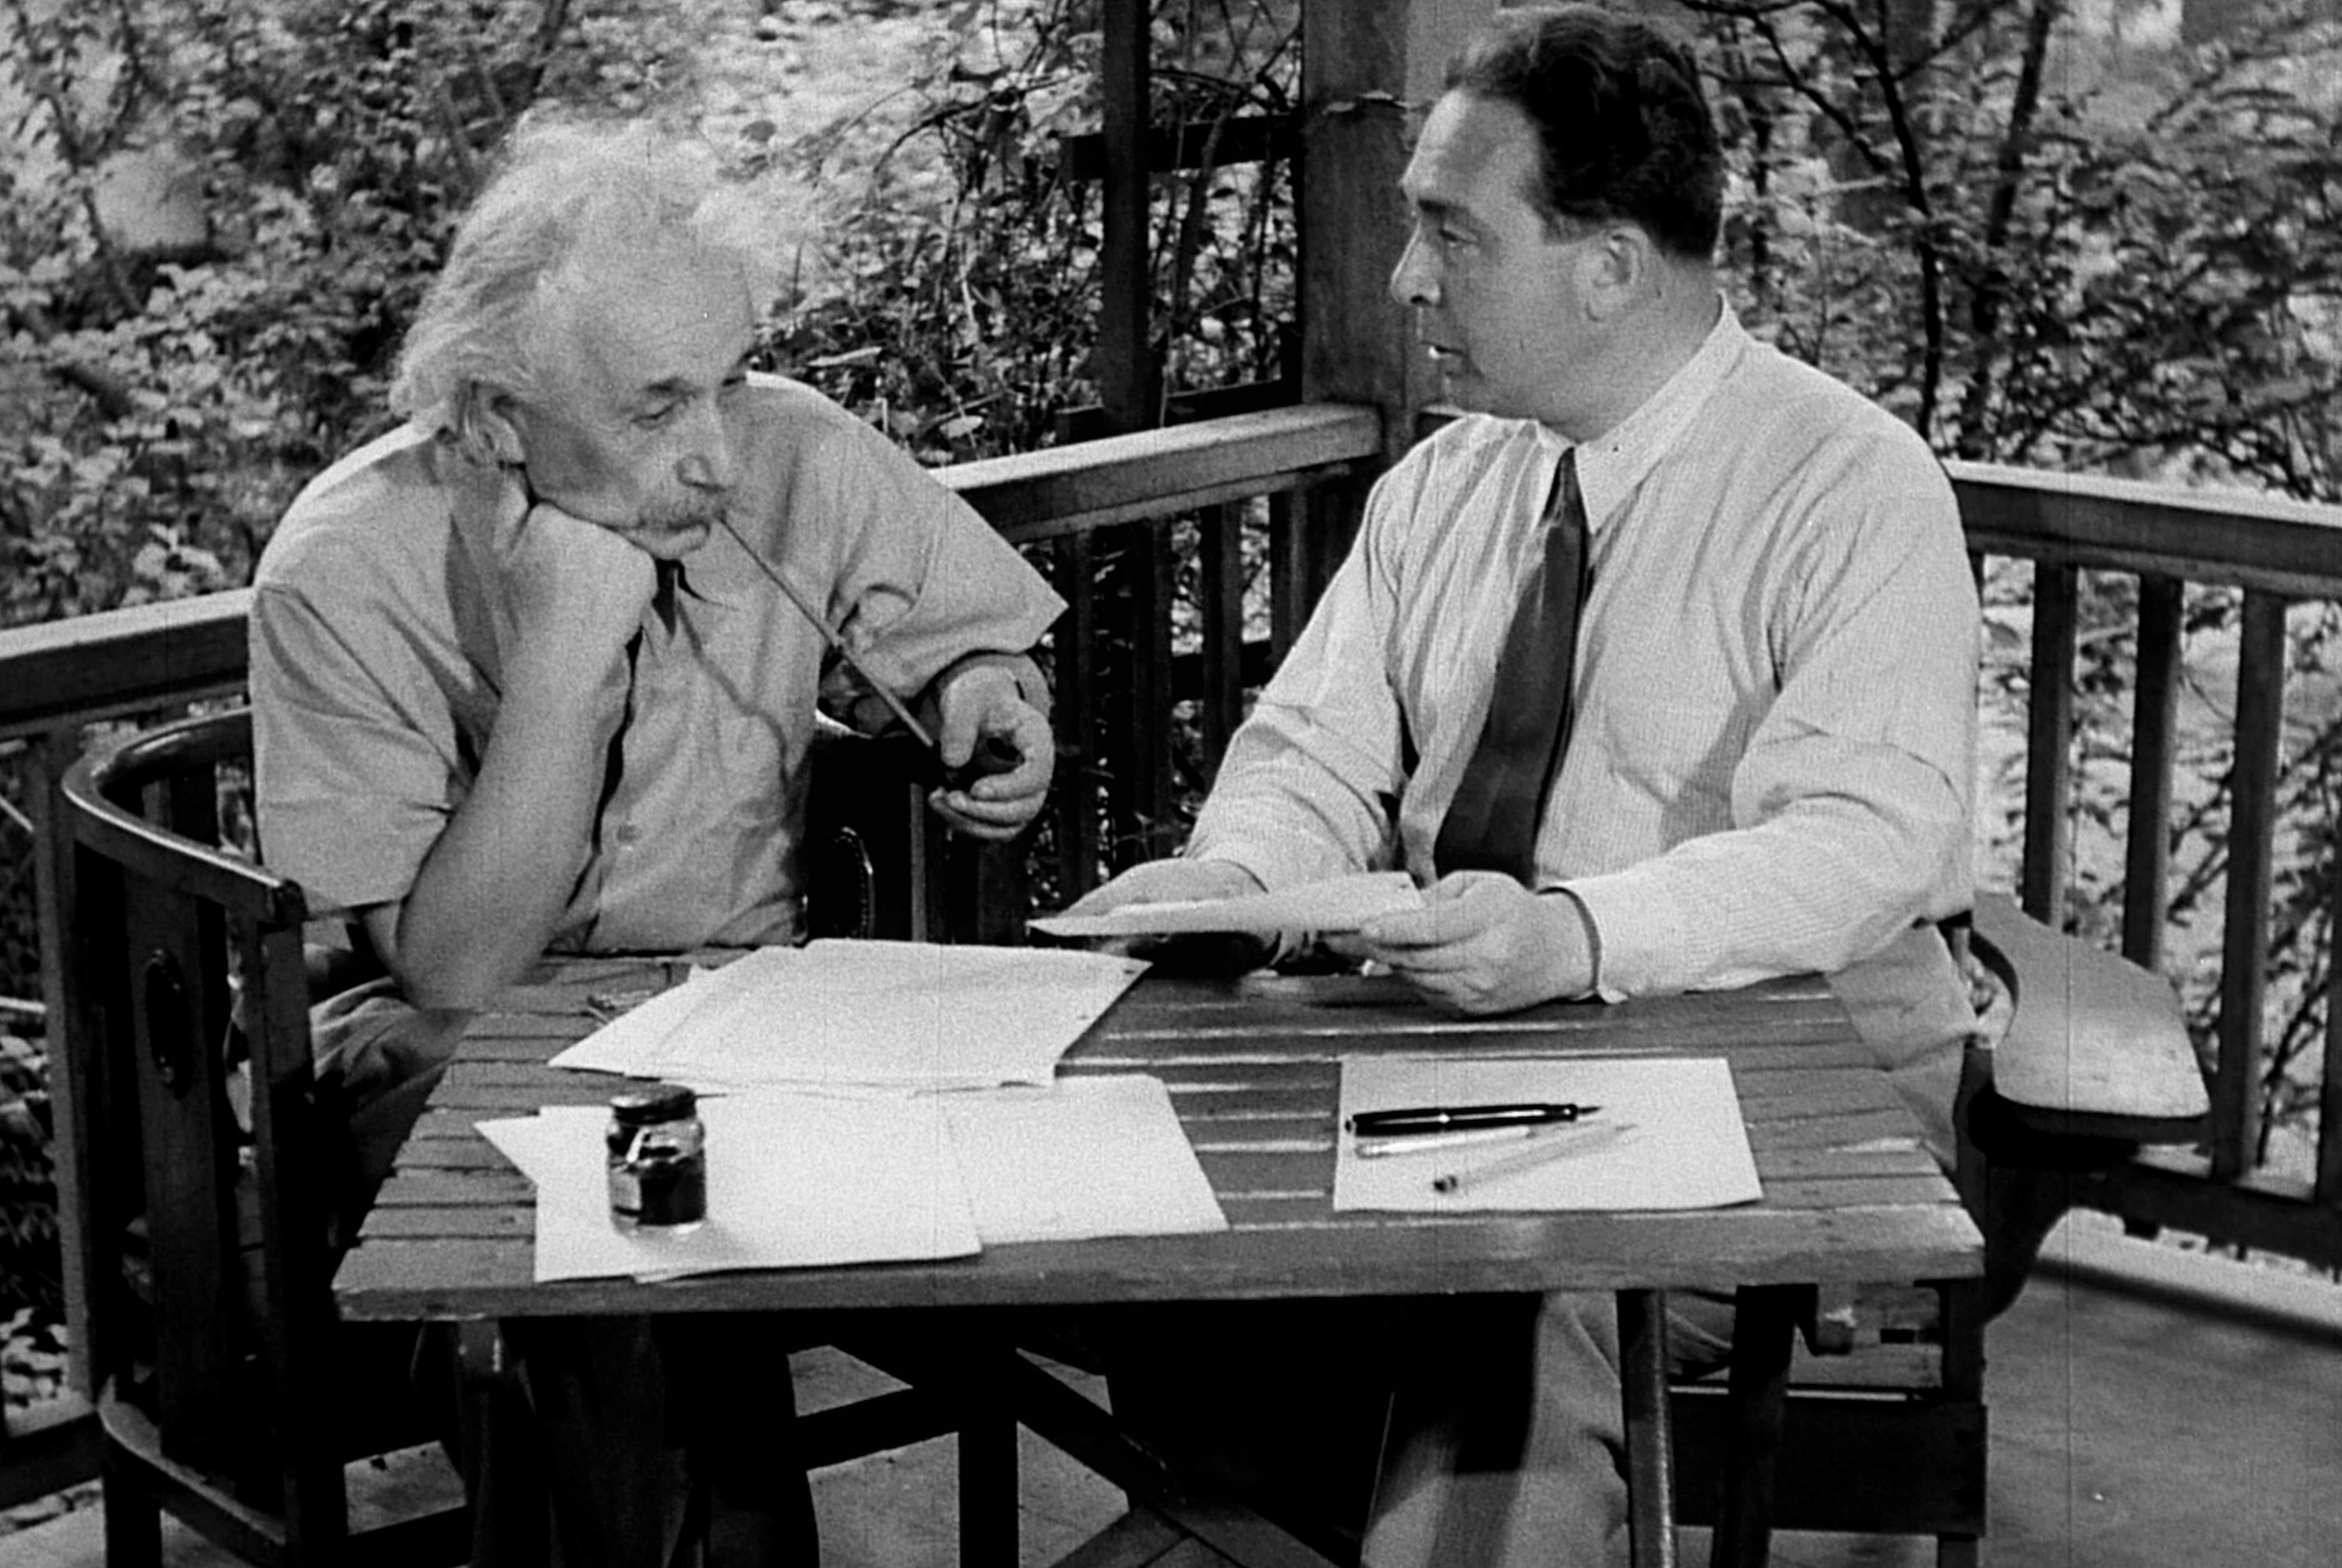 a man (albert einstein) smokes a long pipe while sitting at a desk on an outdoor porch, next to another man in a dress shirt and tie